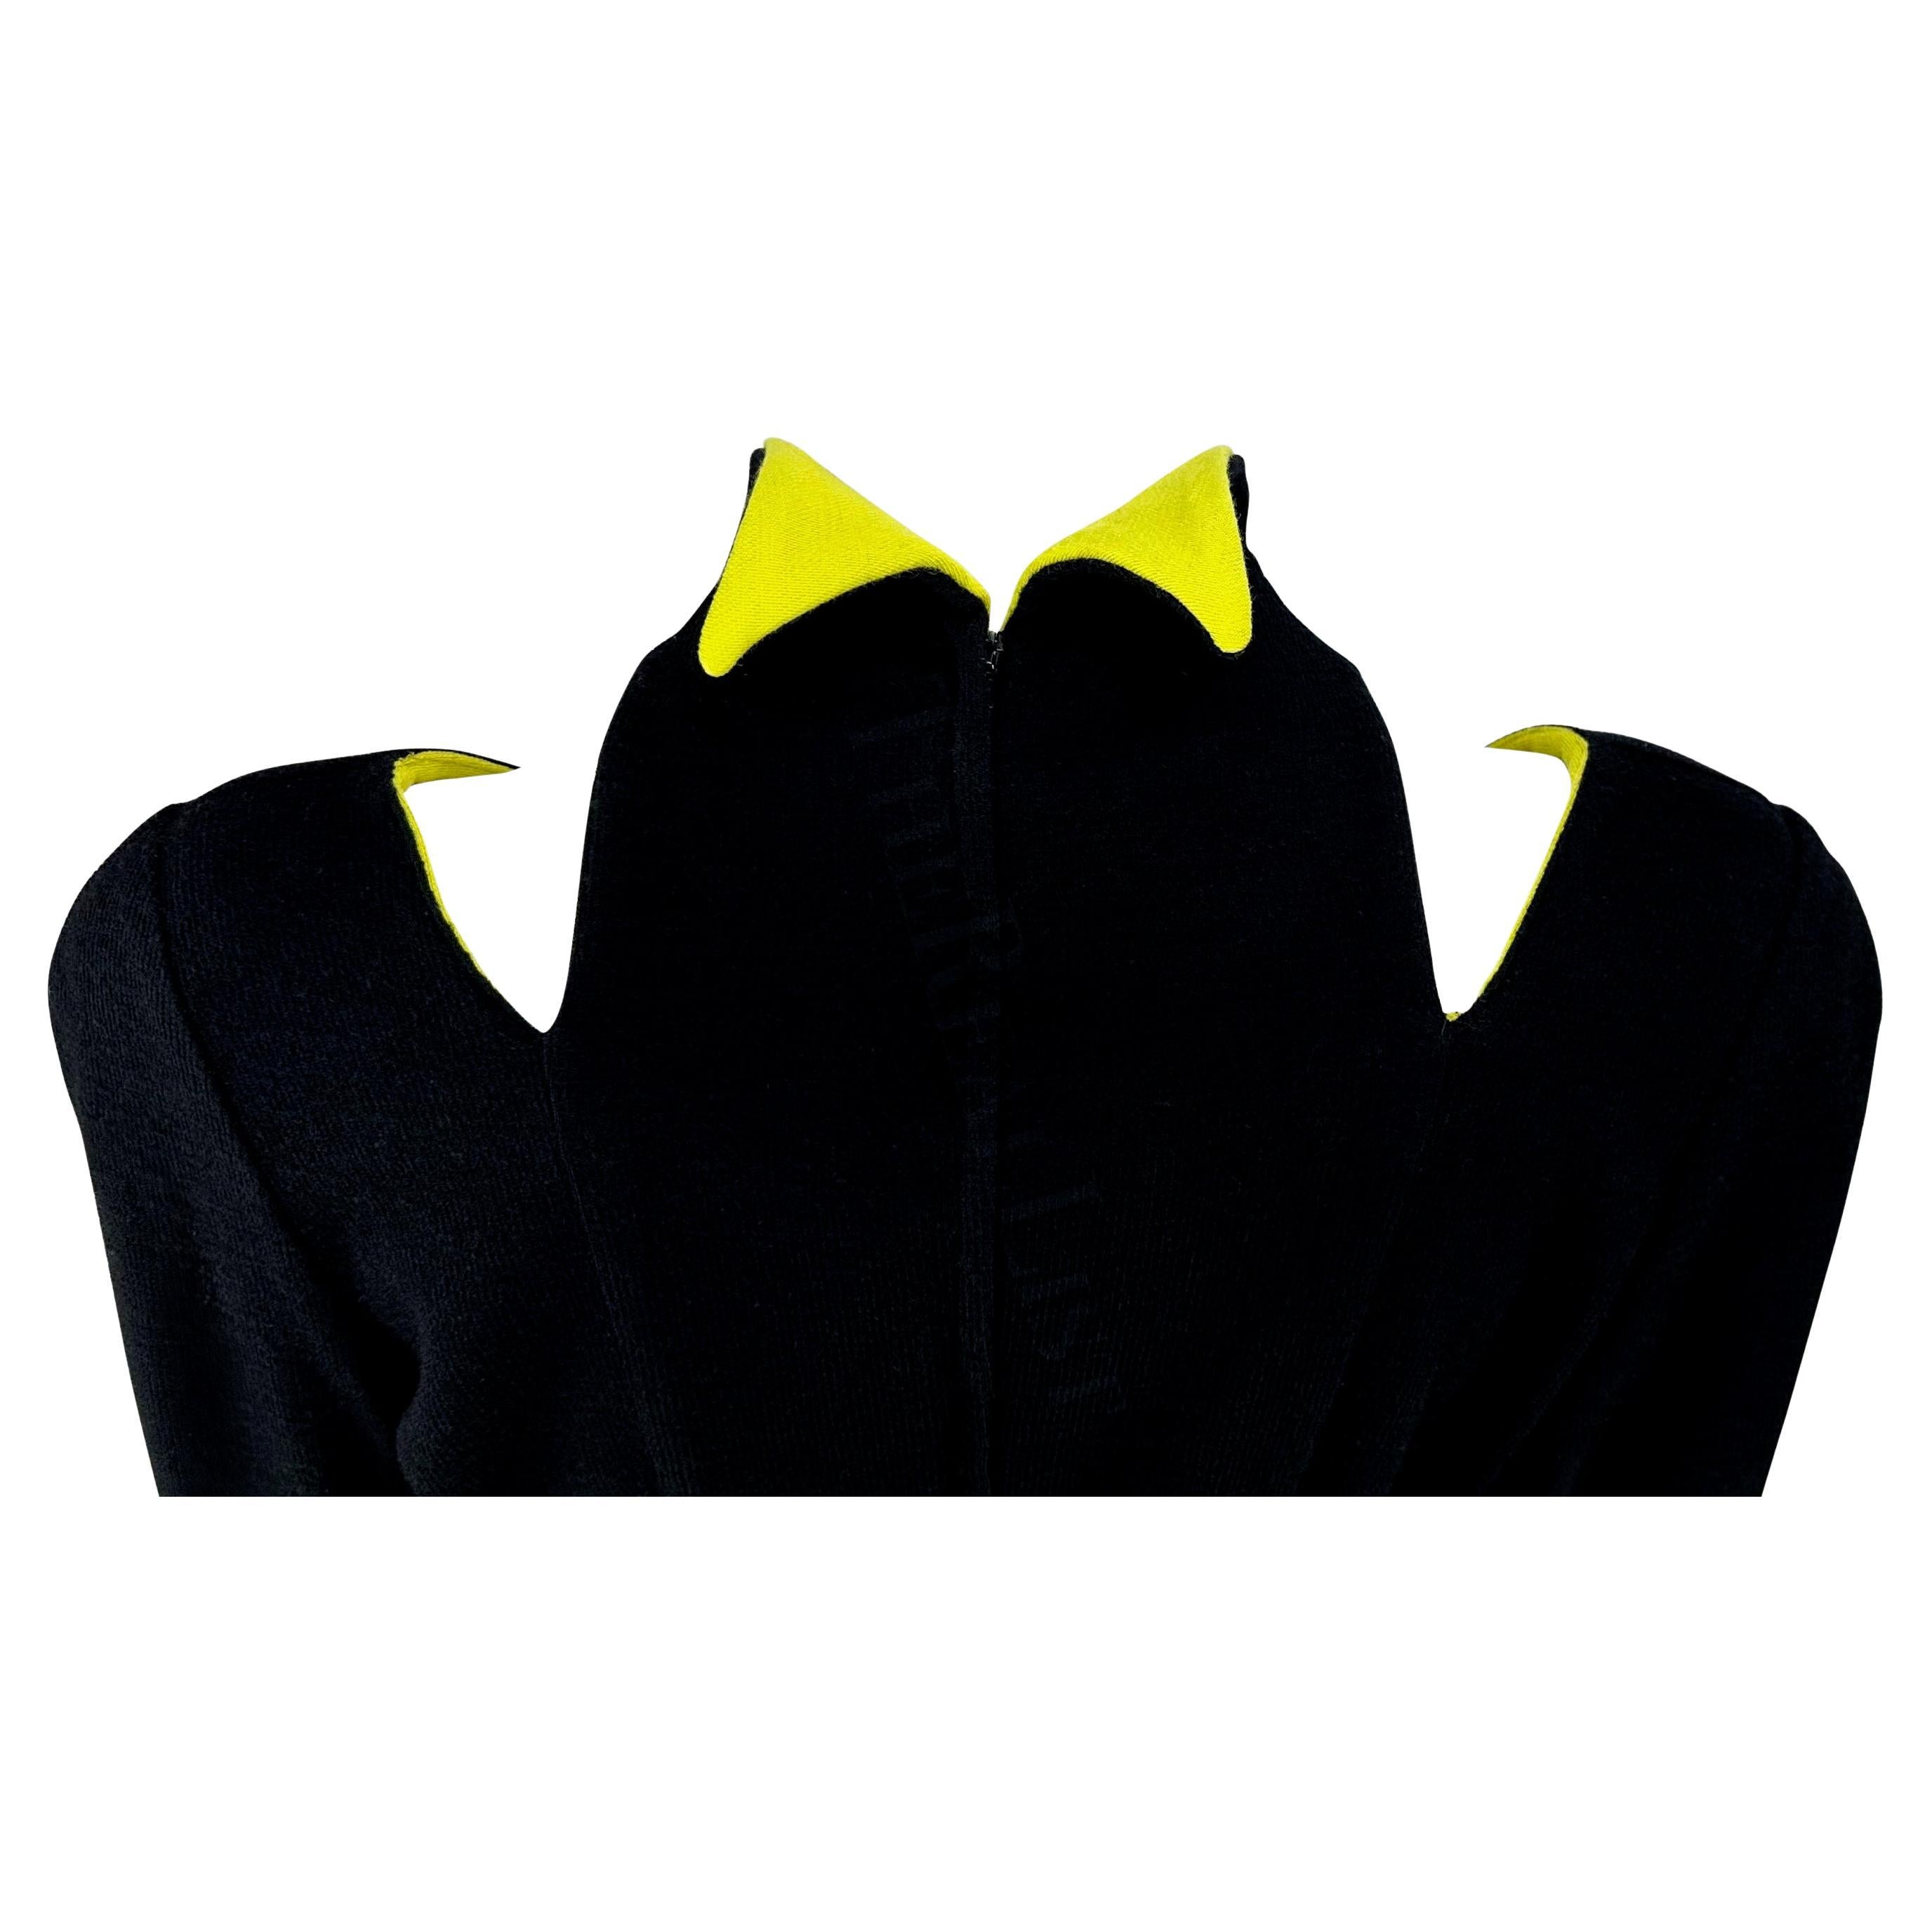 F/W 1988 Thierry Mugler Runway Les Infernales Black Yellow Cut Out Dress 1